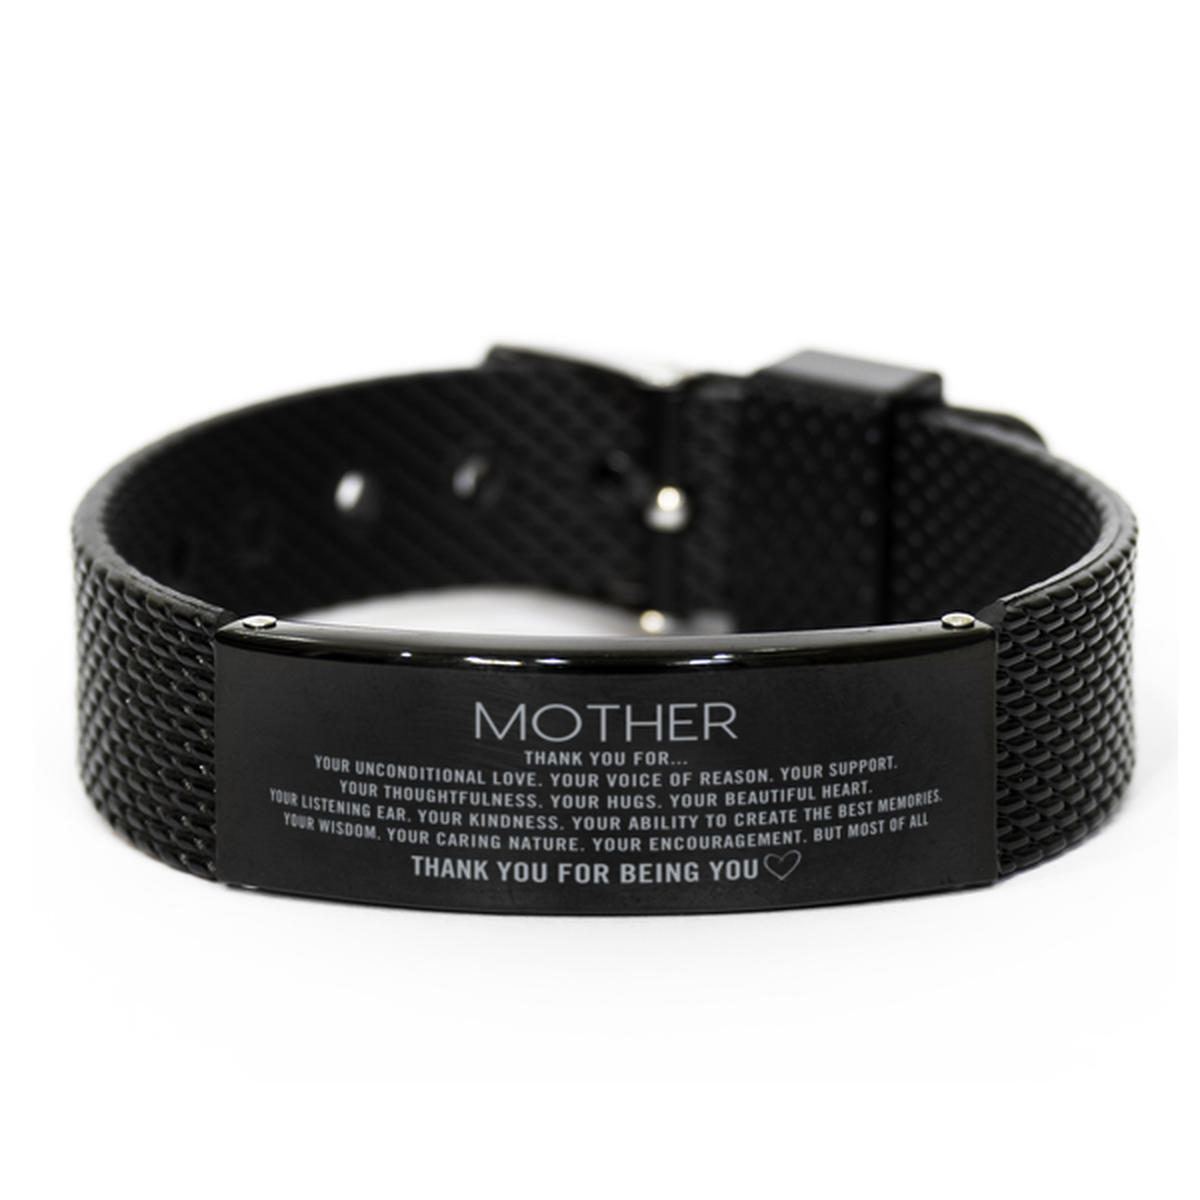 Mother Black Shark Mesh Bracelet Custom, Engraved Gifts For Mother Christmas Graduation Birthday Gifts for Men Women Mother Thank you for Your unconditional love